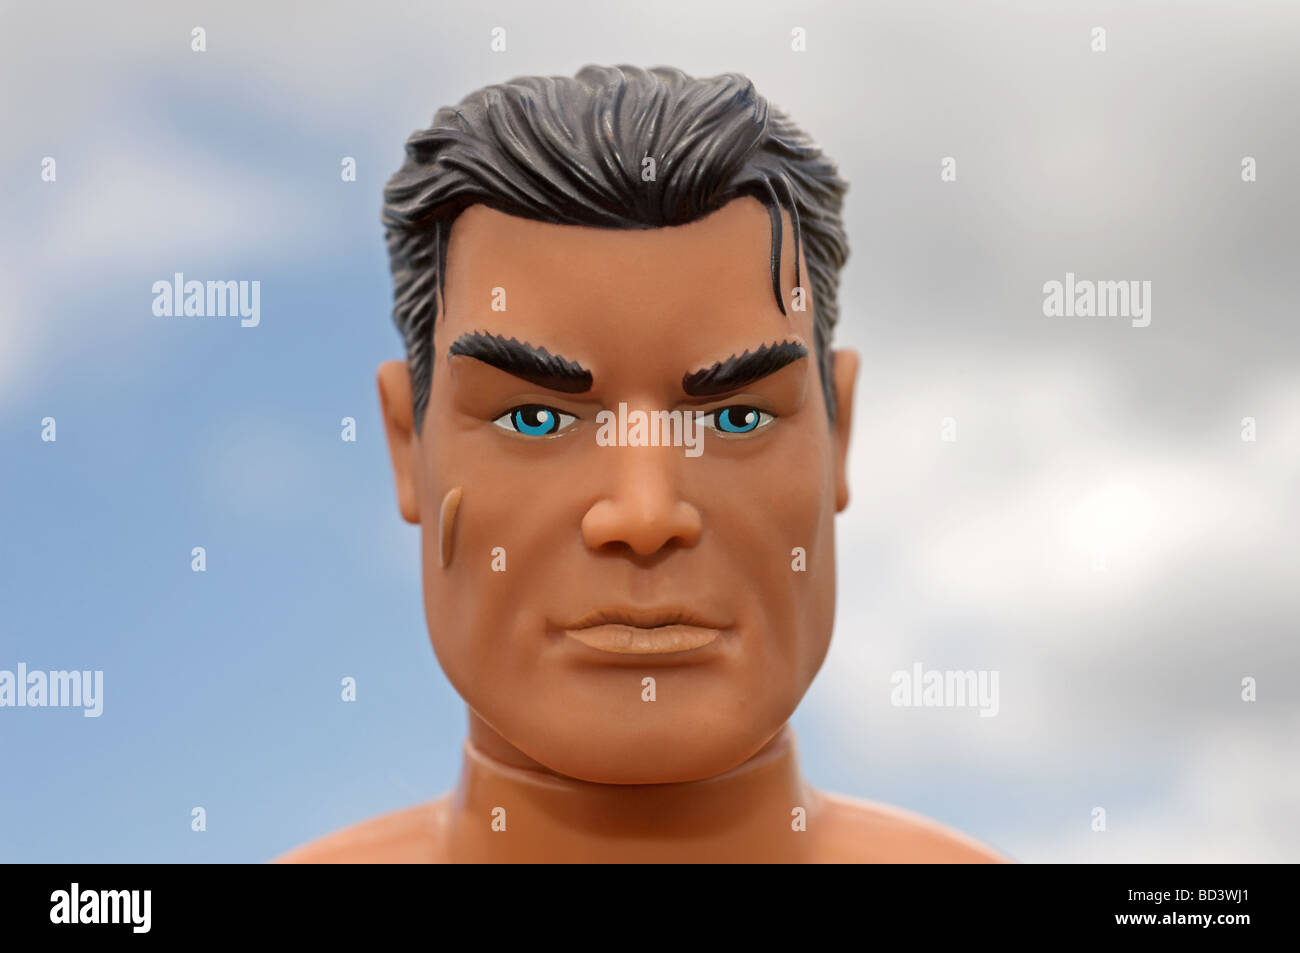 Action man doll hi-res stock photography and images - Alamy